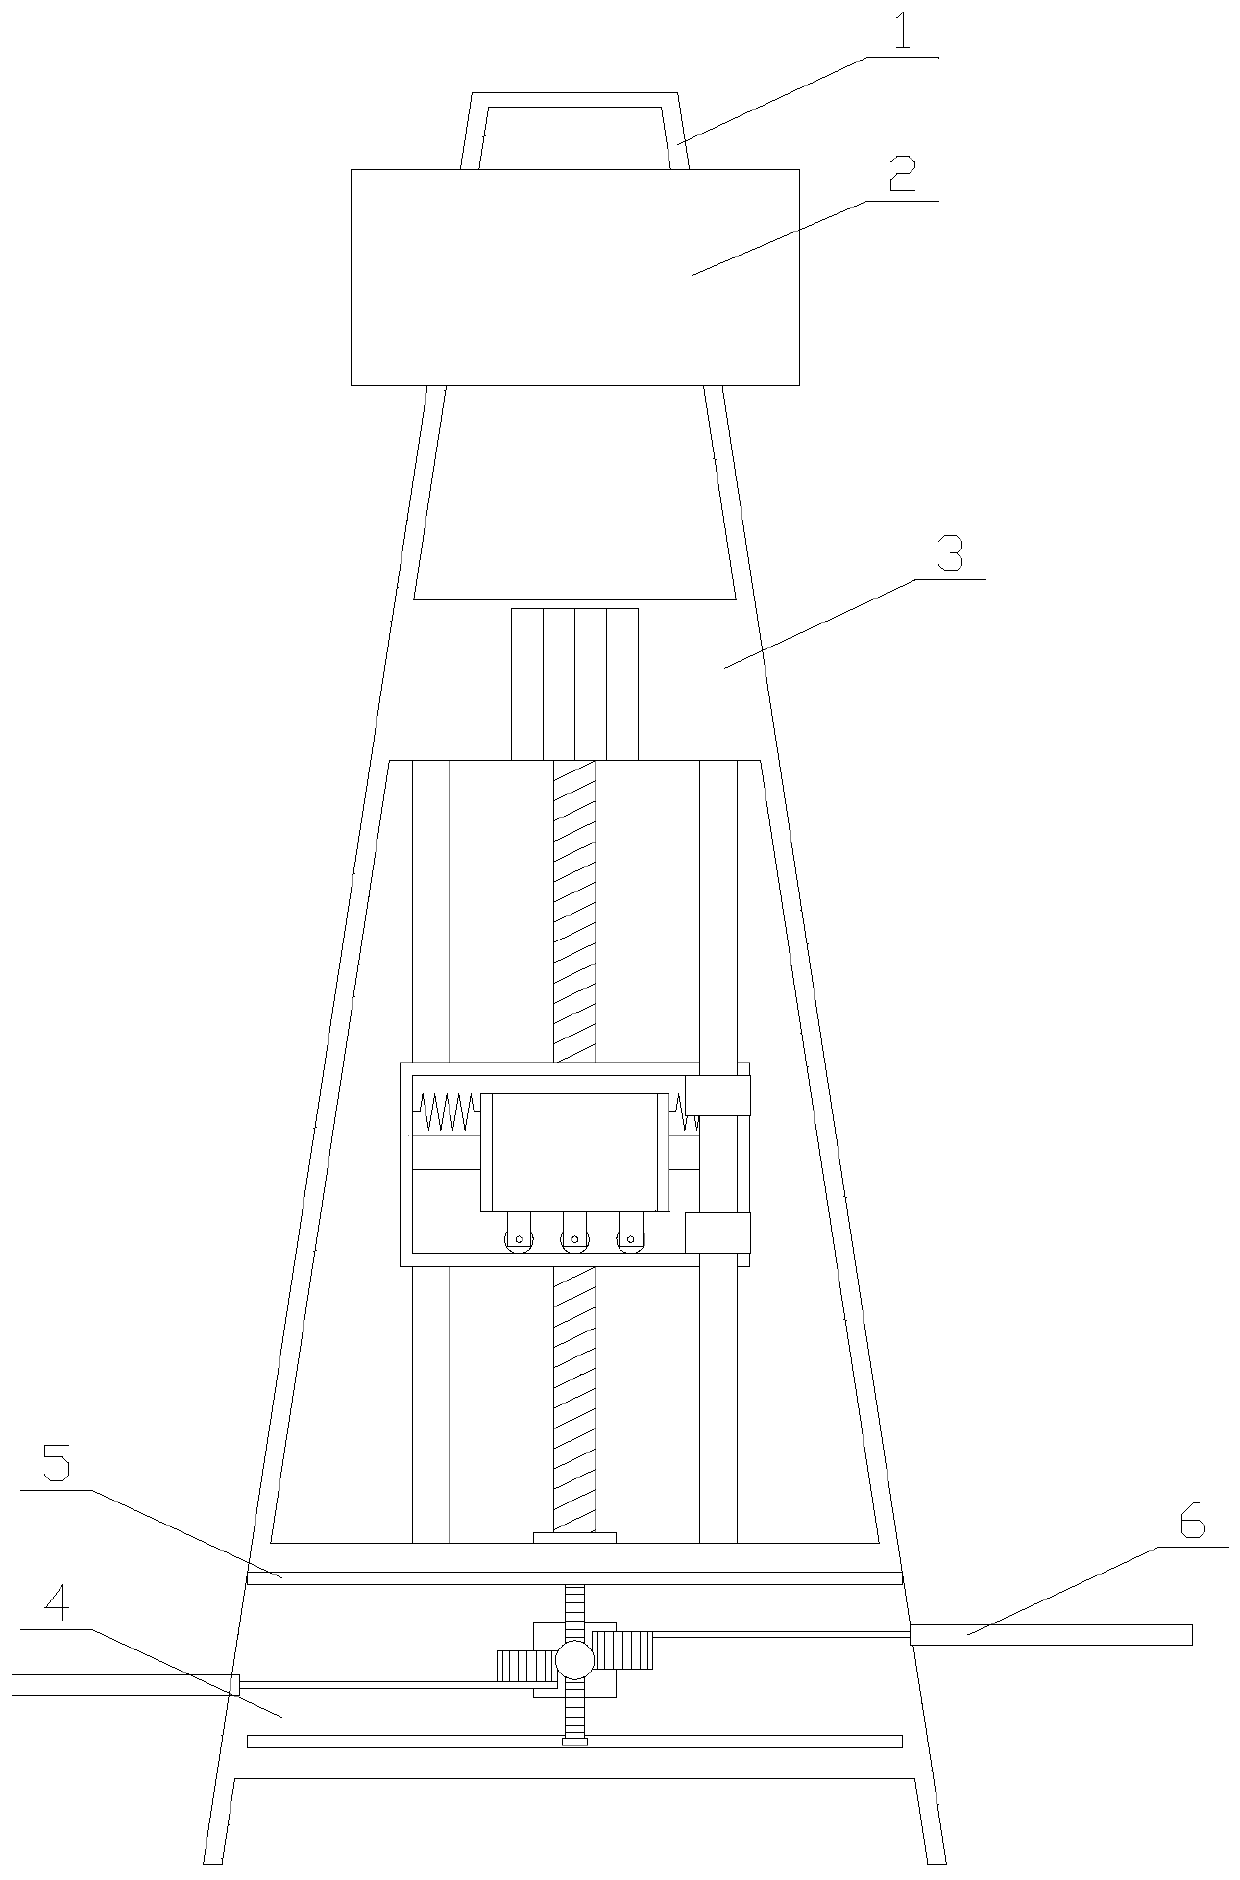 A communication tower with high stability and anti-climbing function